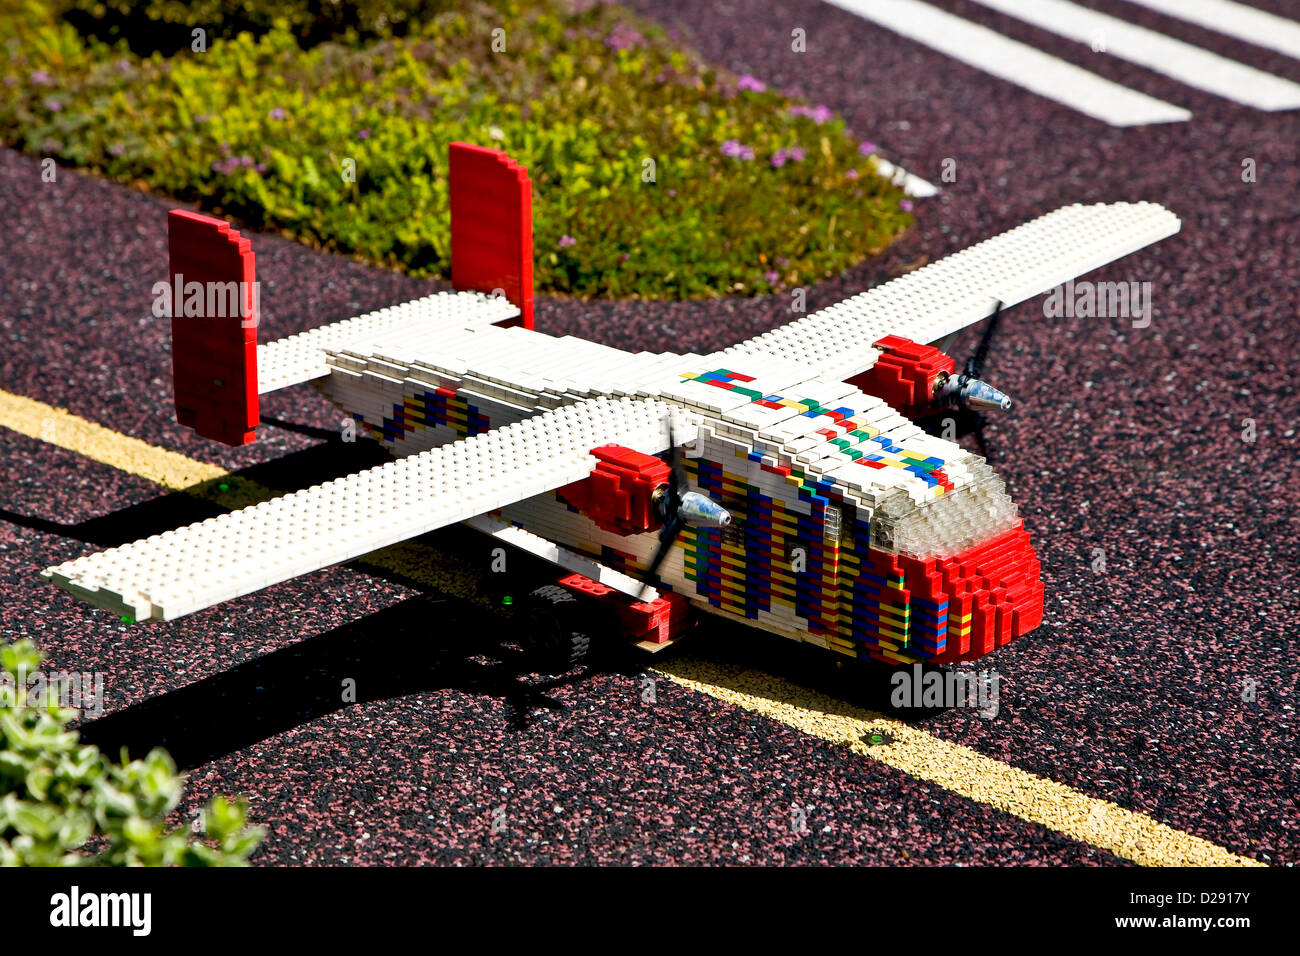 Lego Aircraft High Resolution Stock Photography and Images - Alamy